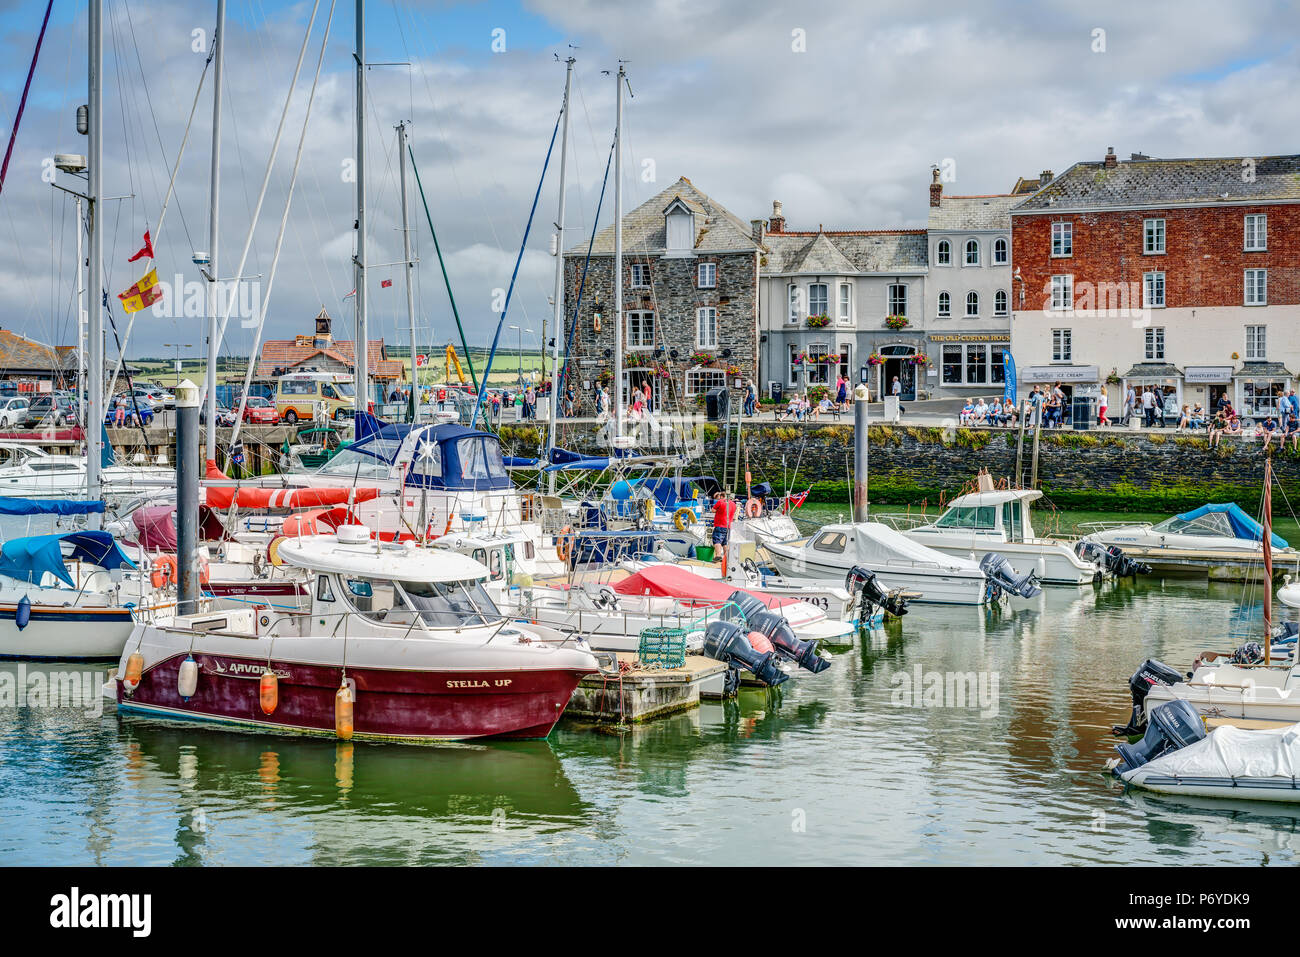 This is a harbour scene taken at Padstow, Cornwall, England showing a view of different boats moored in the marina with a backdrop of old buildings. Stock Photo